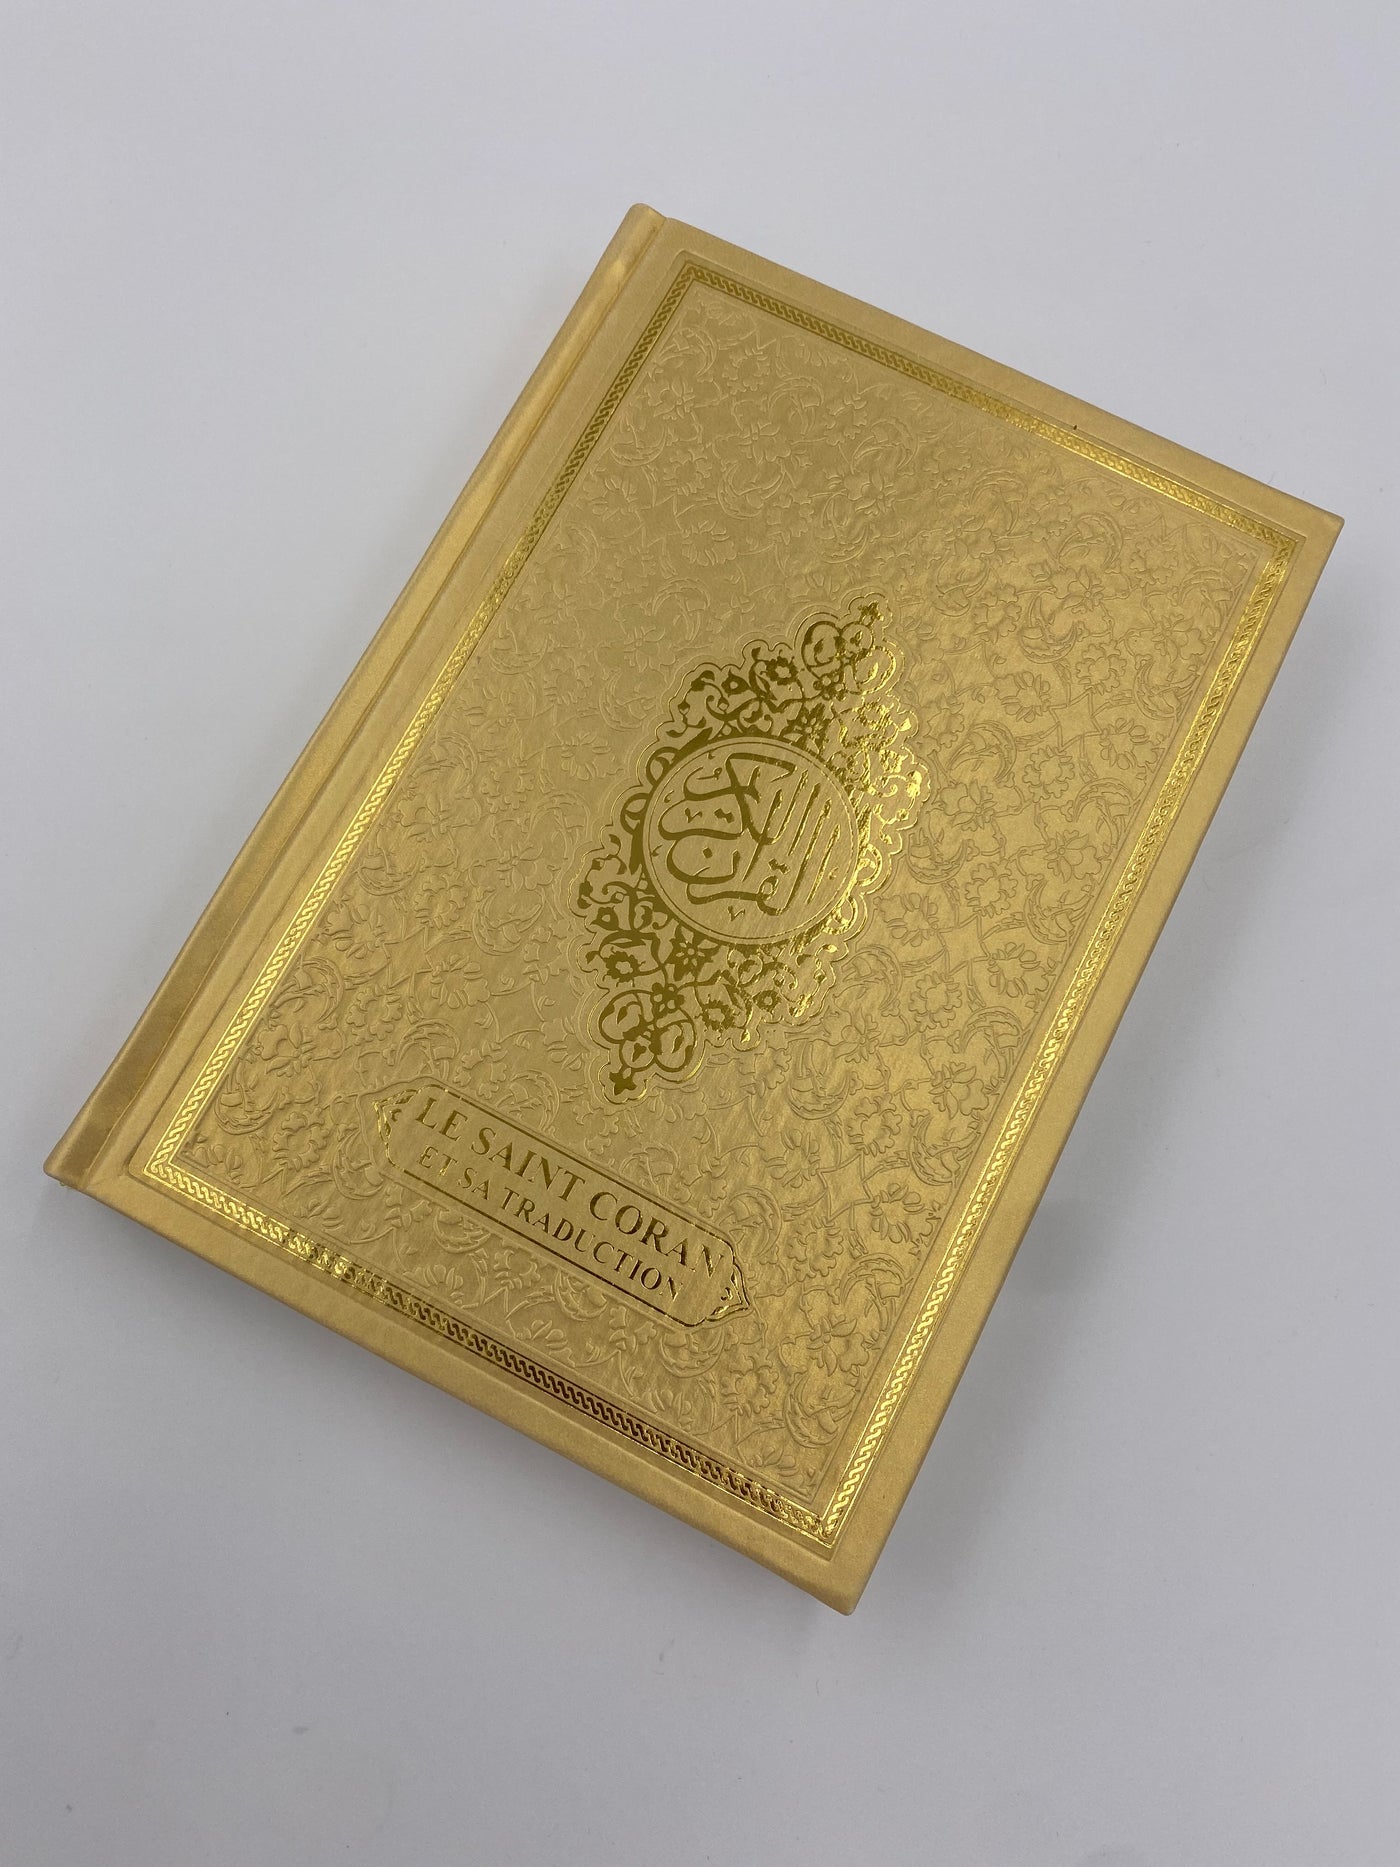 The noble French-Arabic Quran